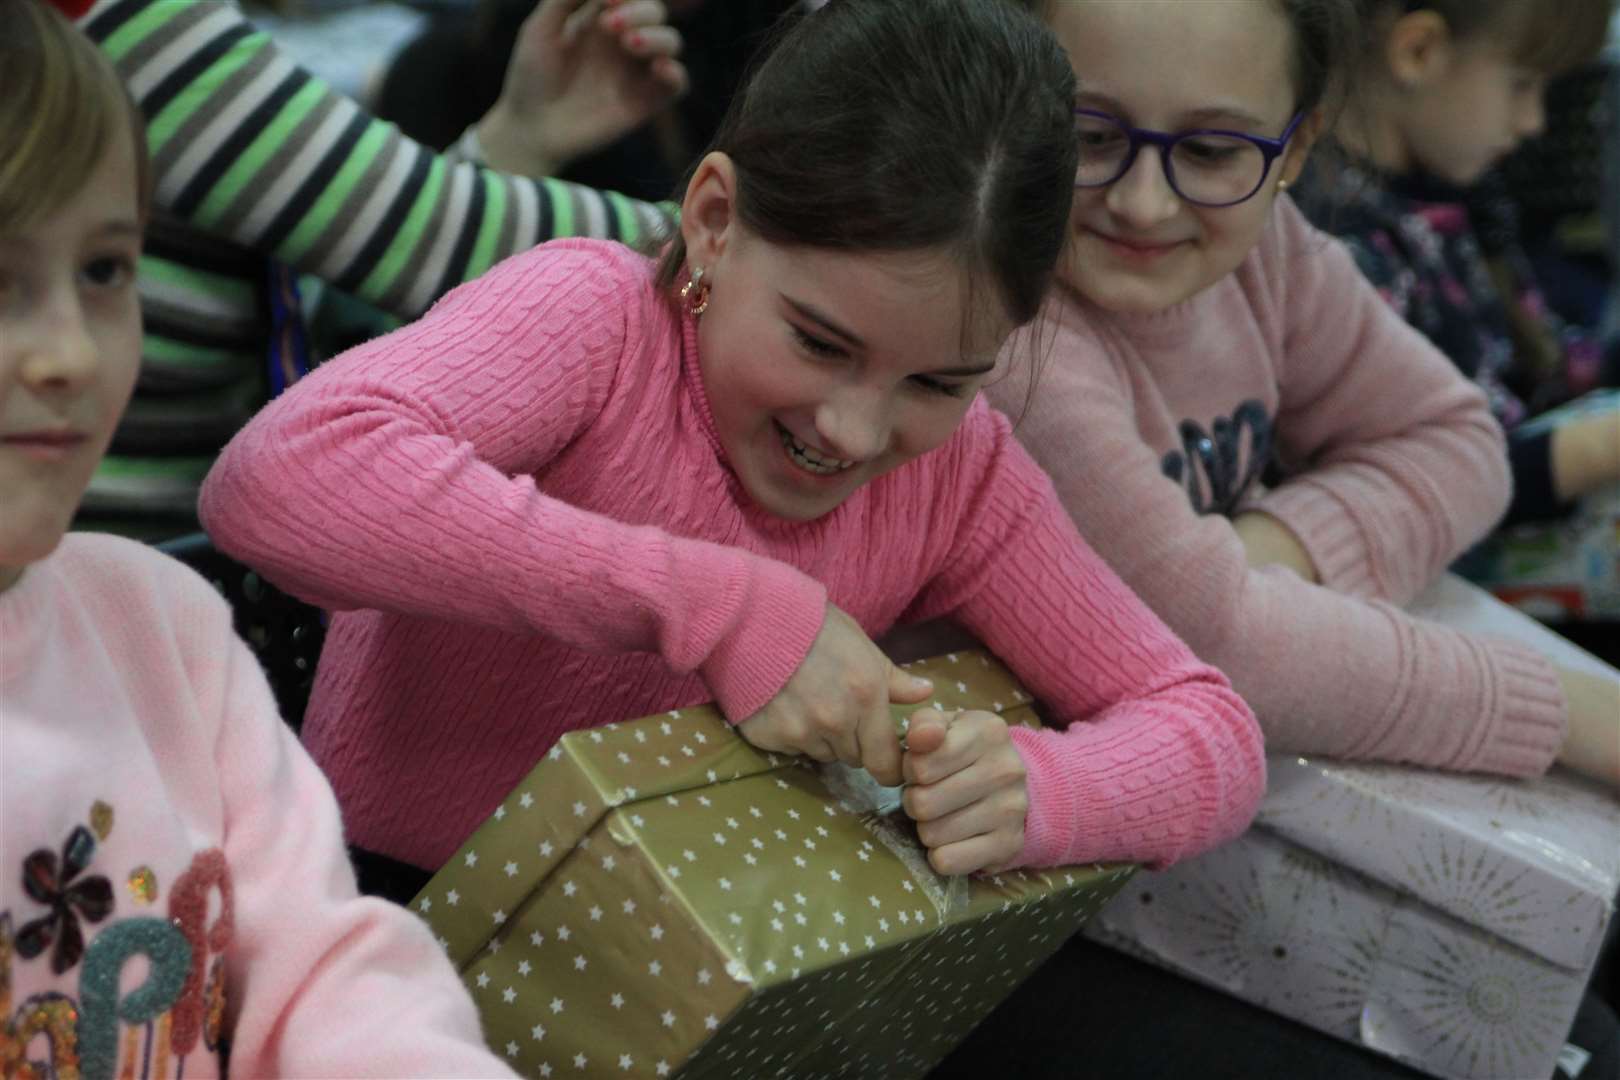 Vlada (9) is excited to unwrap her gift box.